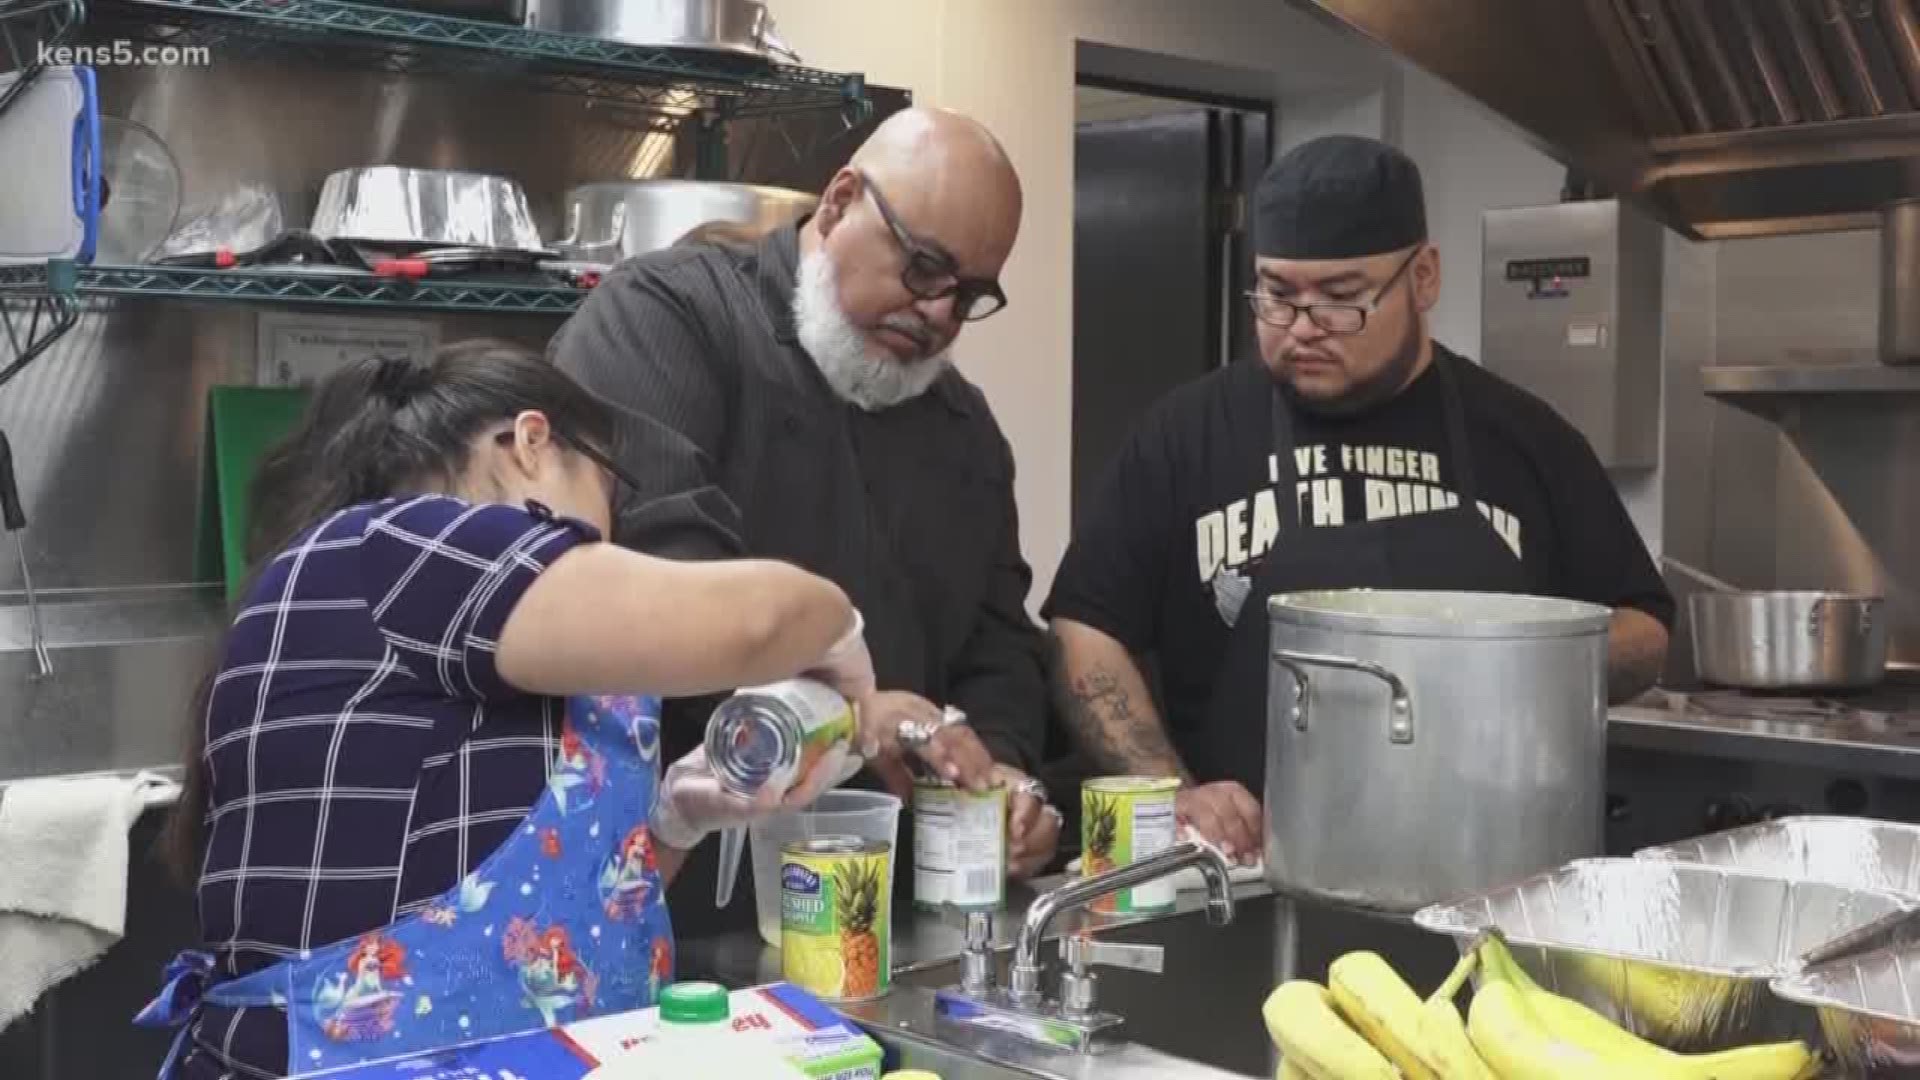 This San Antonio chef returned to the place he once called home this Thanksgiving to give thanks, and to pay it forward.